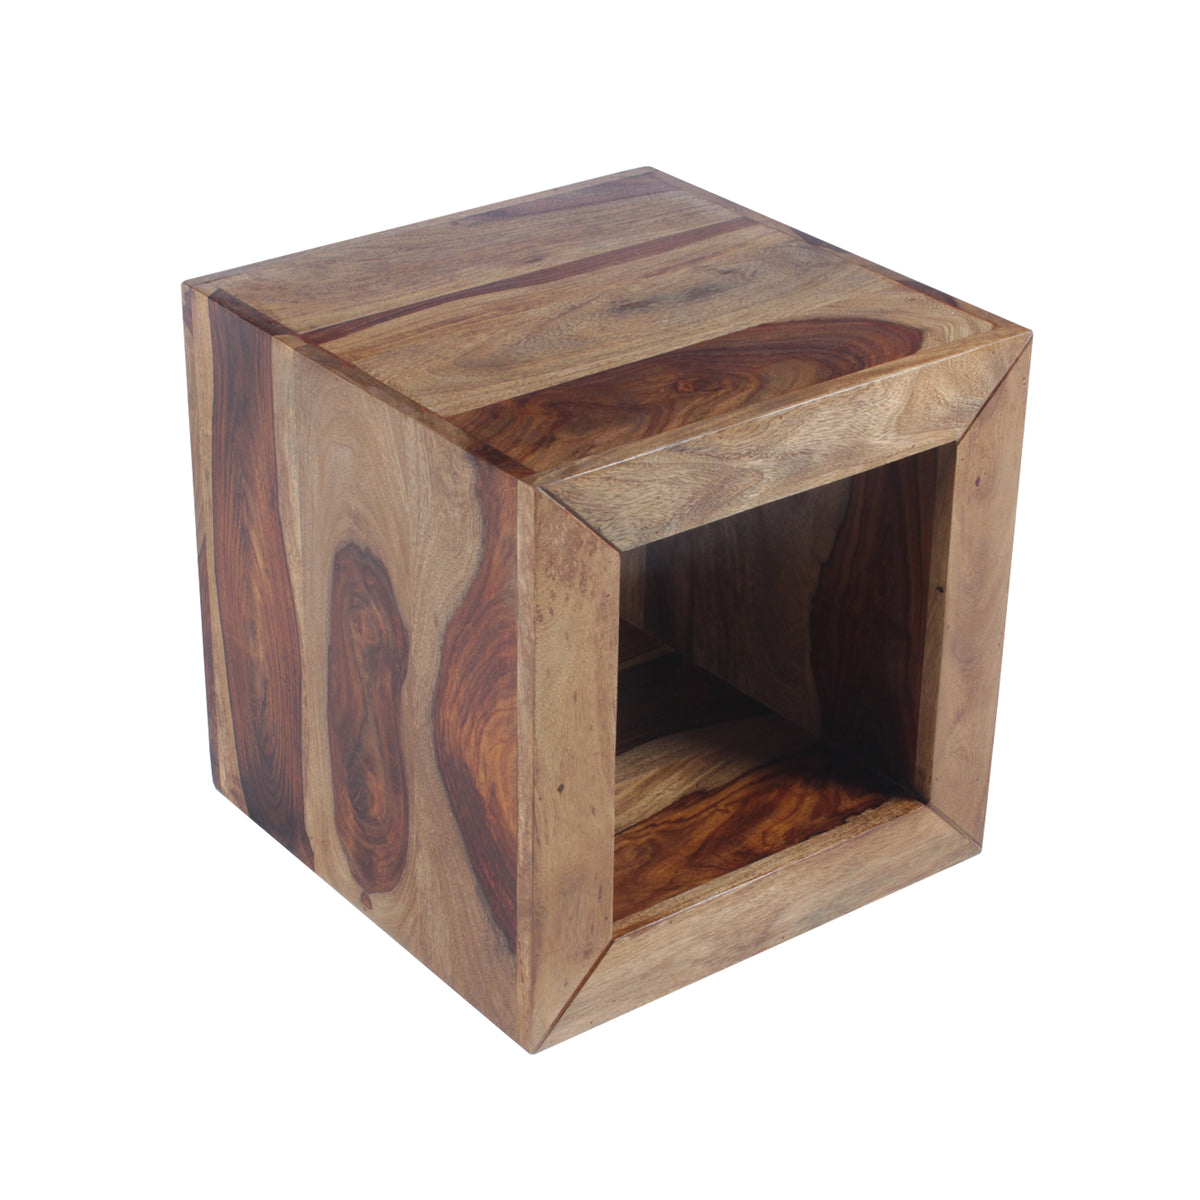 Cube Shape Rosewood Side Table With Cutout Bottom, Brown - UPT‐30350